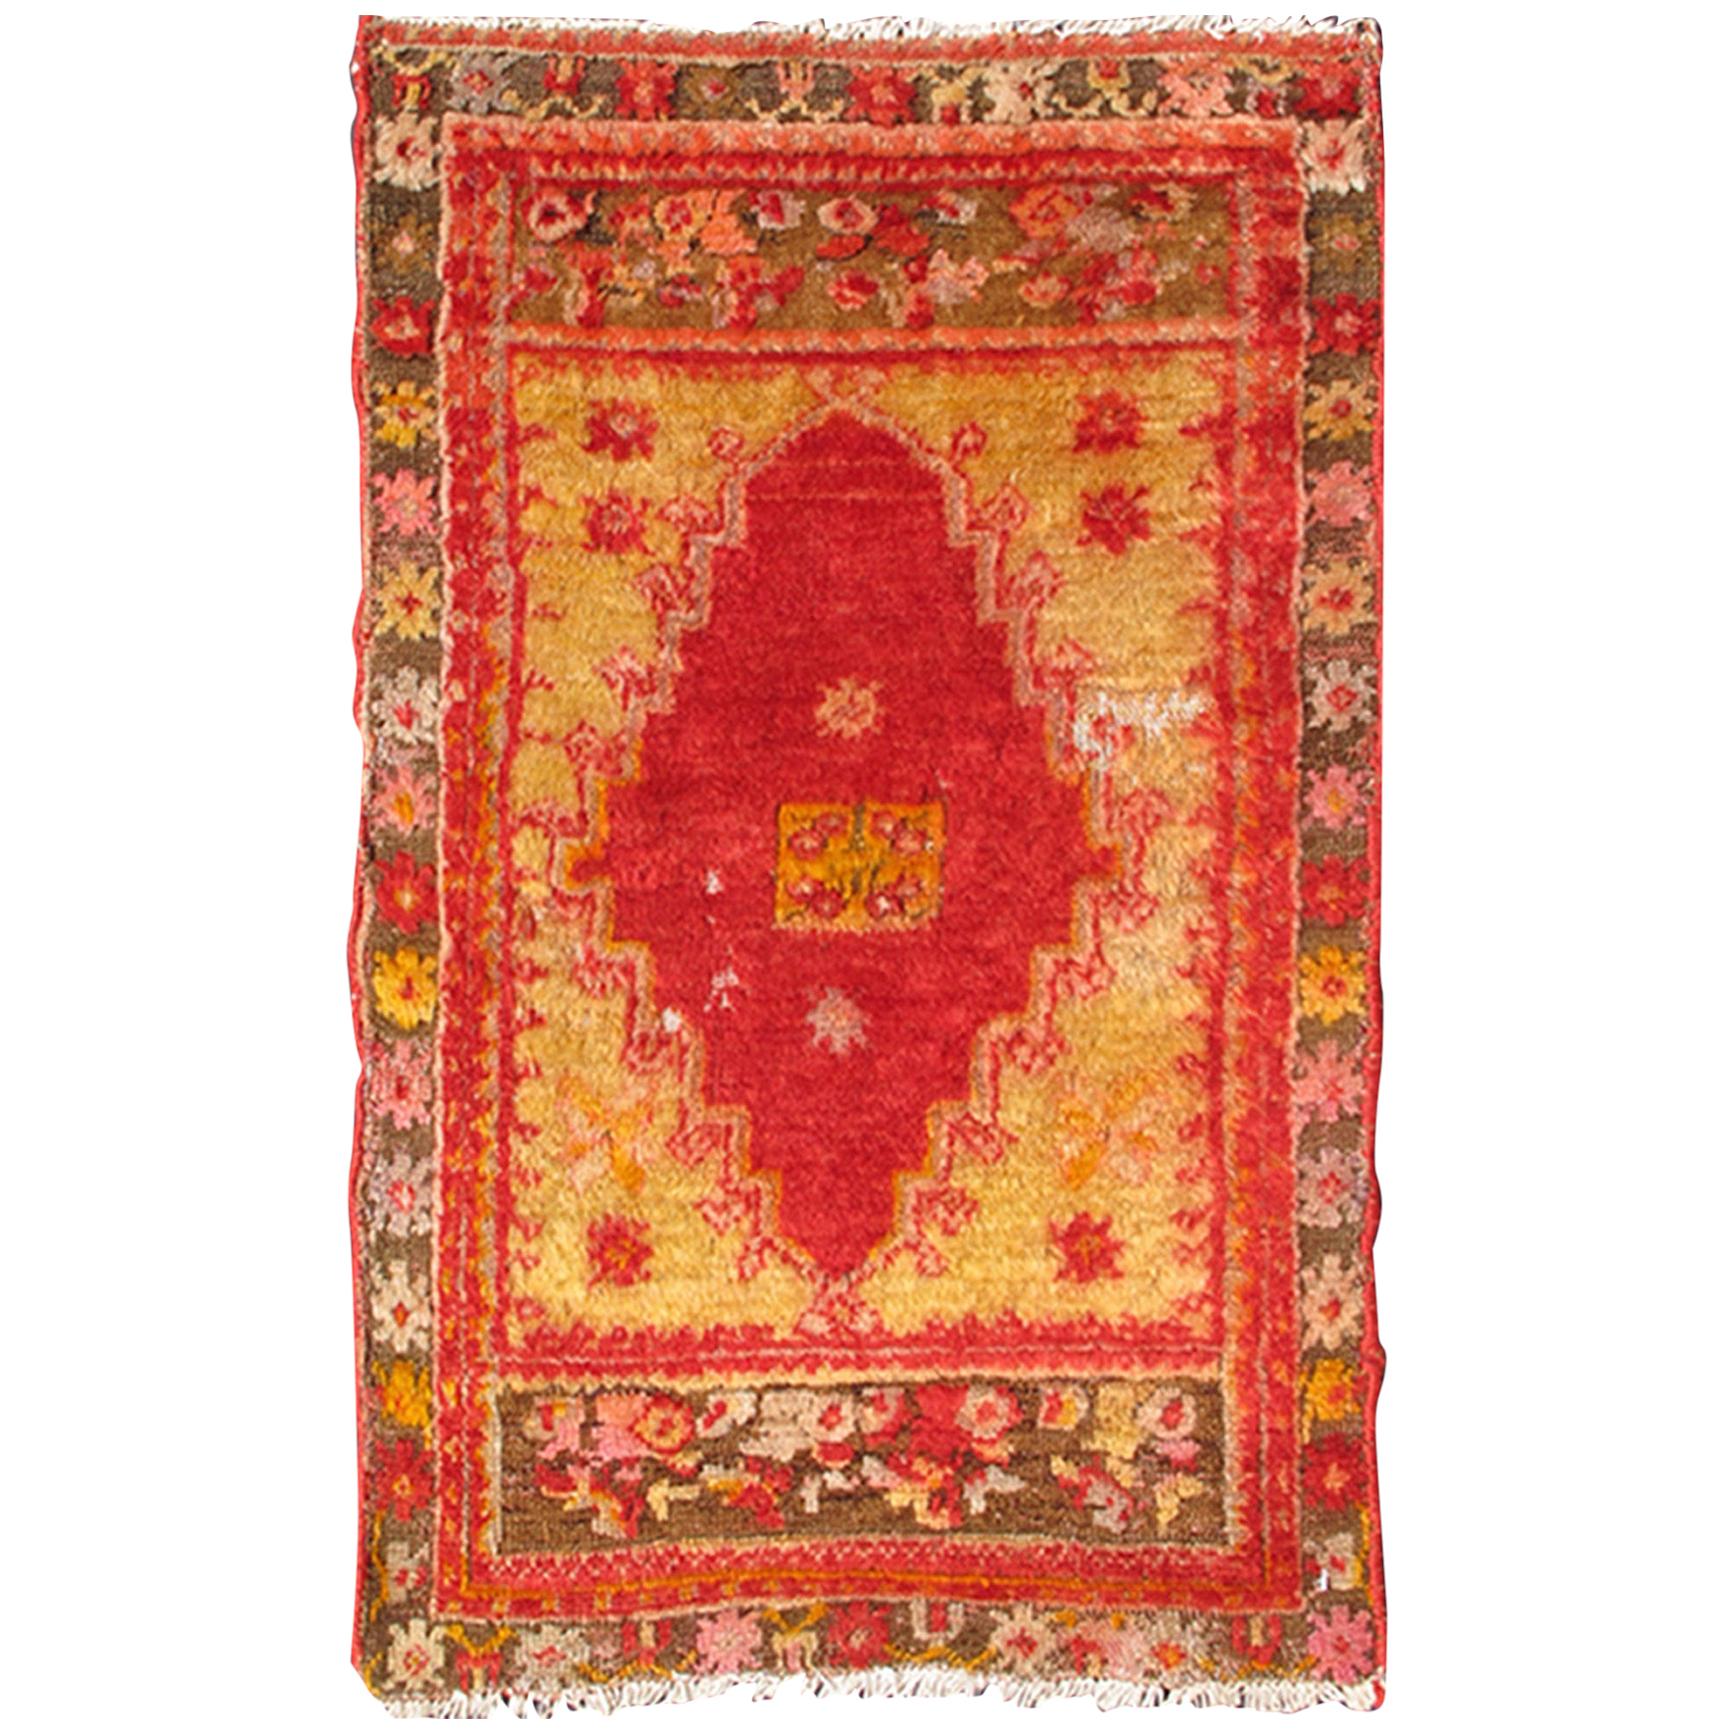 Small Antique Angora Small Turkish Oushak Rug with Vibrant Red, Green and Gold